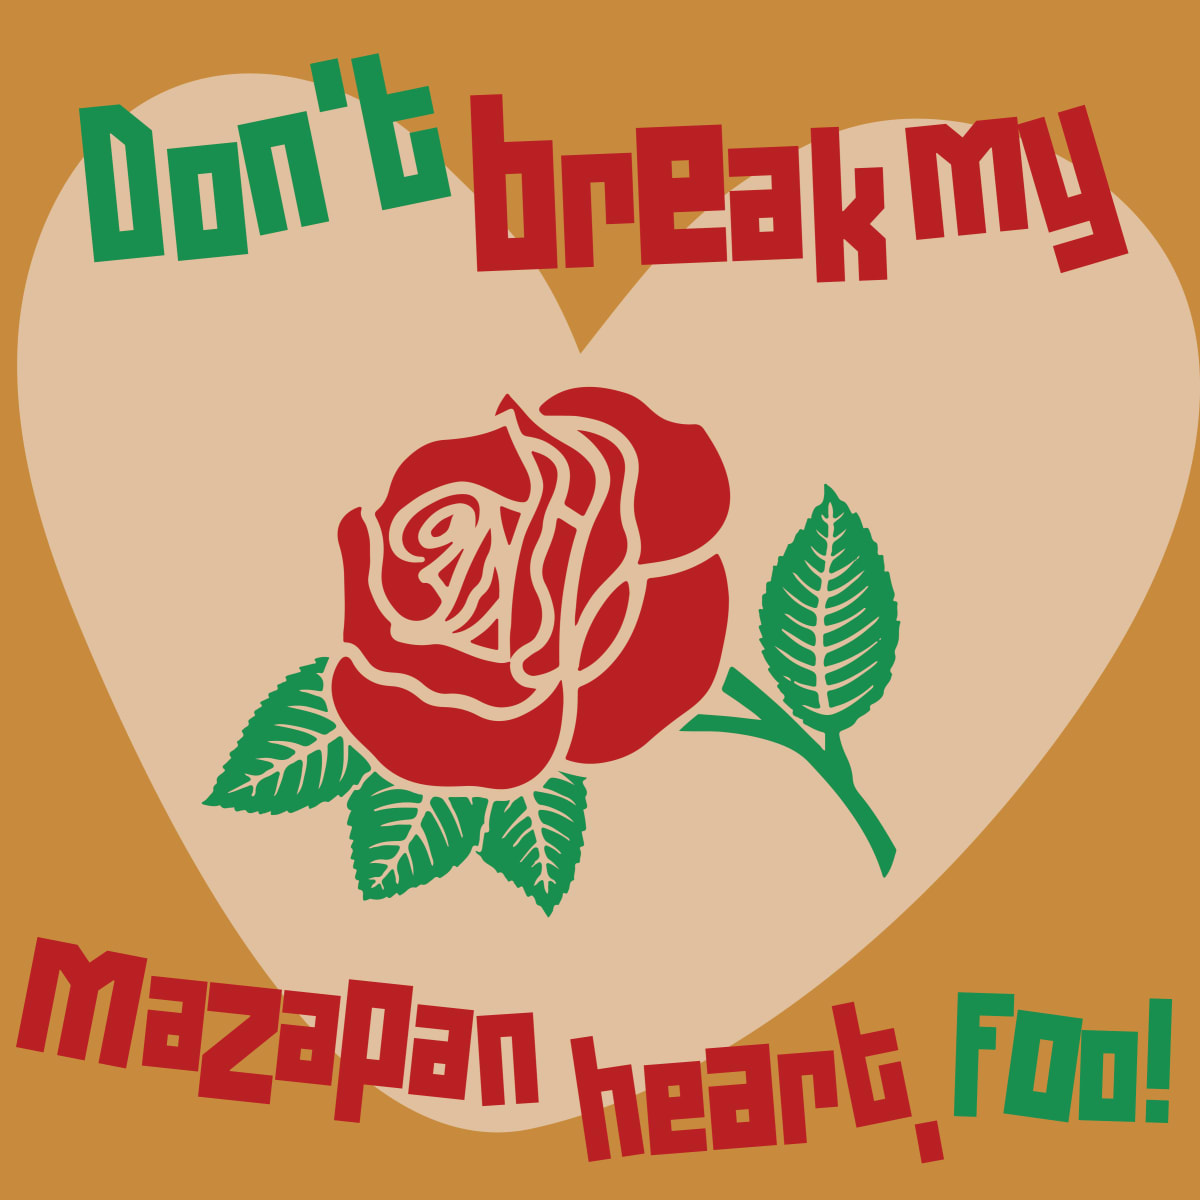 Don't Break My Mazapan Heart, Foo! by Miguel Maltos Gonzales  Image: Nombre foooooo, careful with that amor! Don't break my Mazapan heart. If they can open a Mazapan without breaking it, marry that foo(Click the purchase link for size options)
